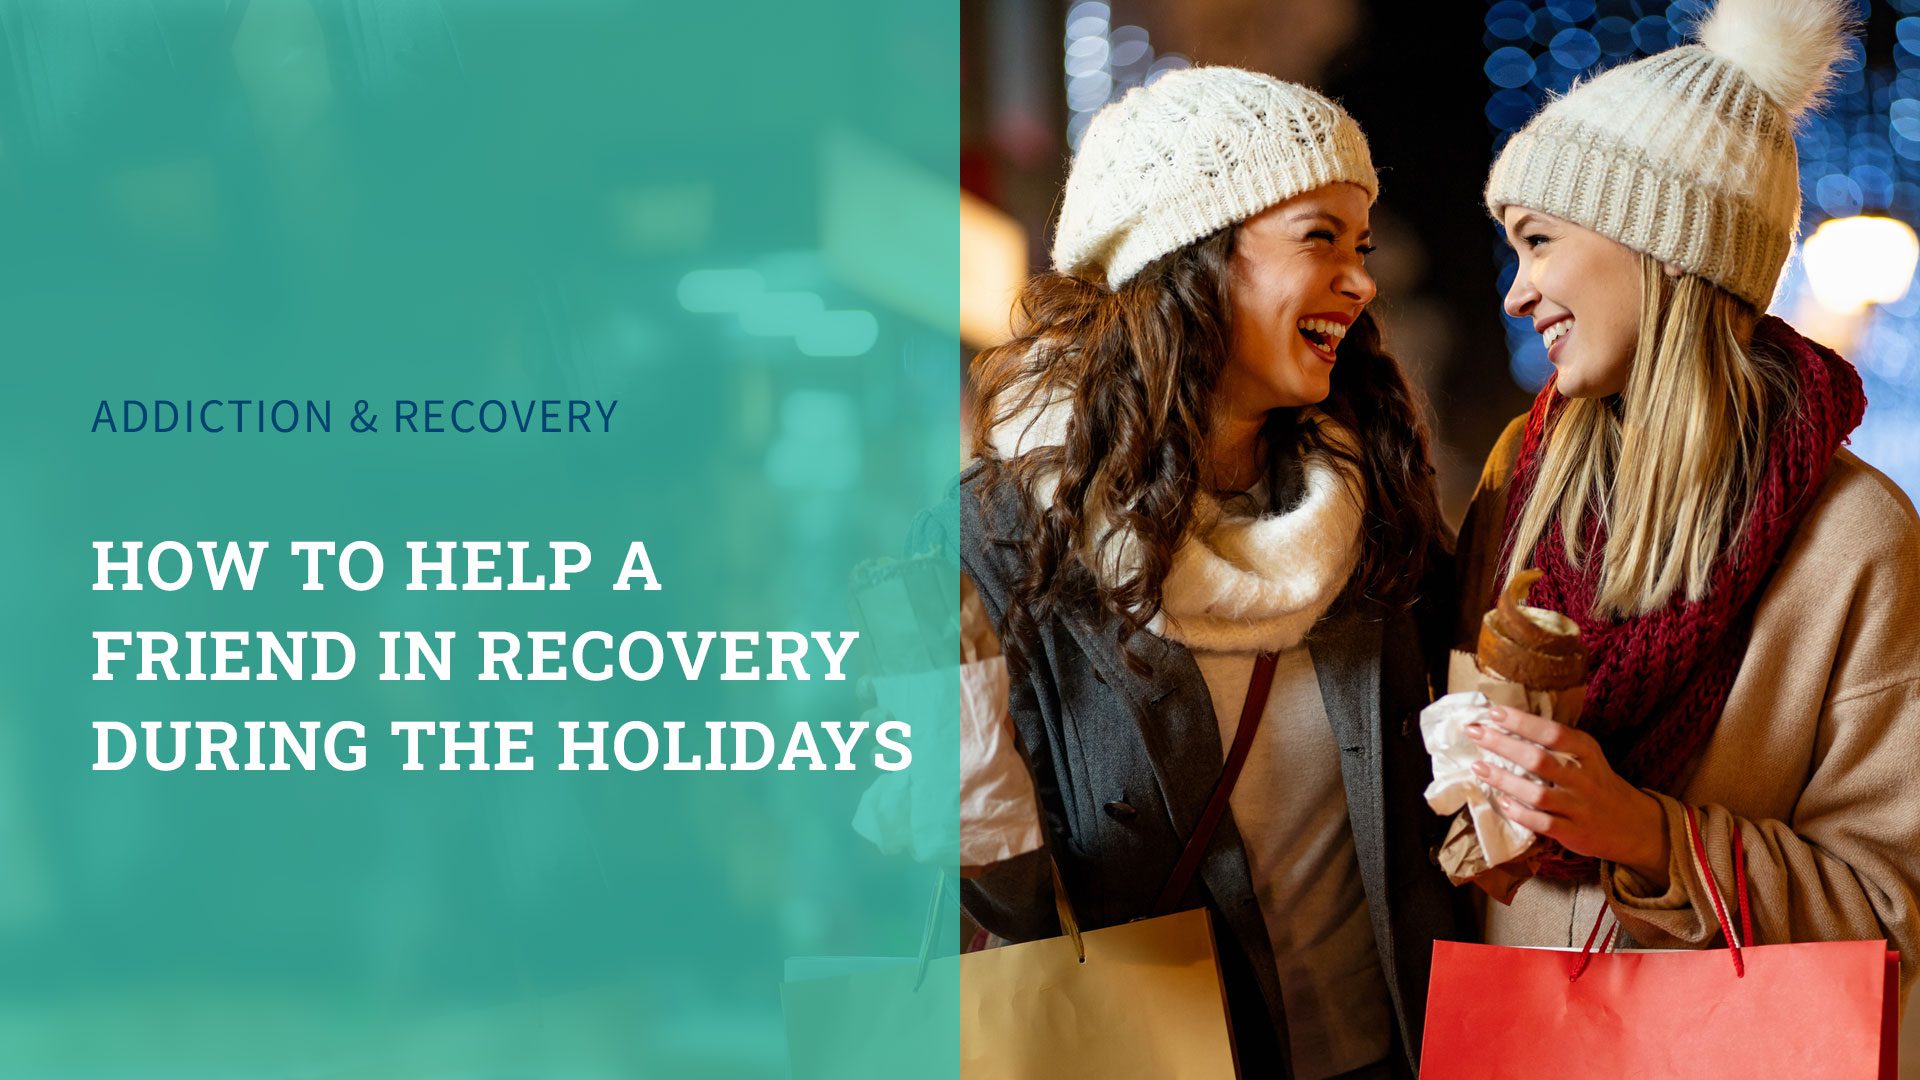 How to Help a Friend in Recovery During the Holidays